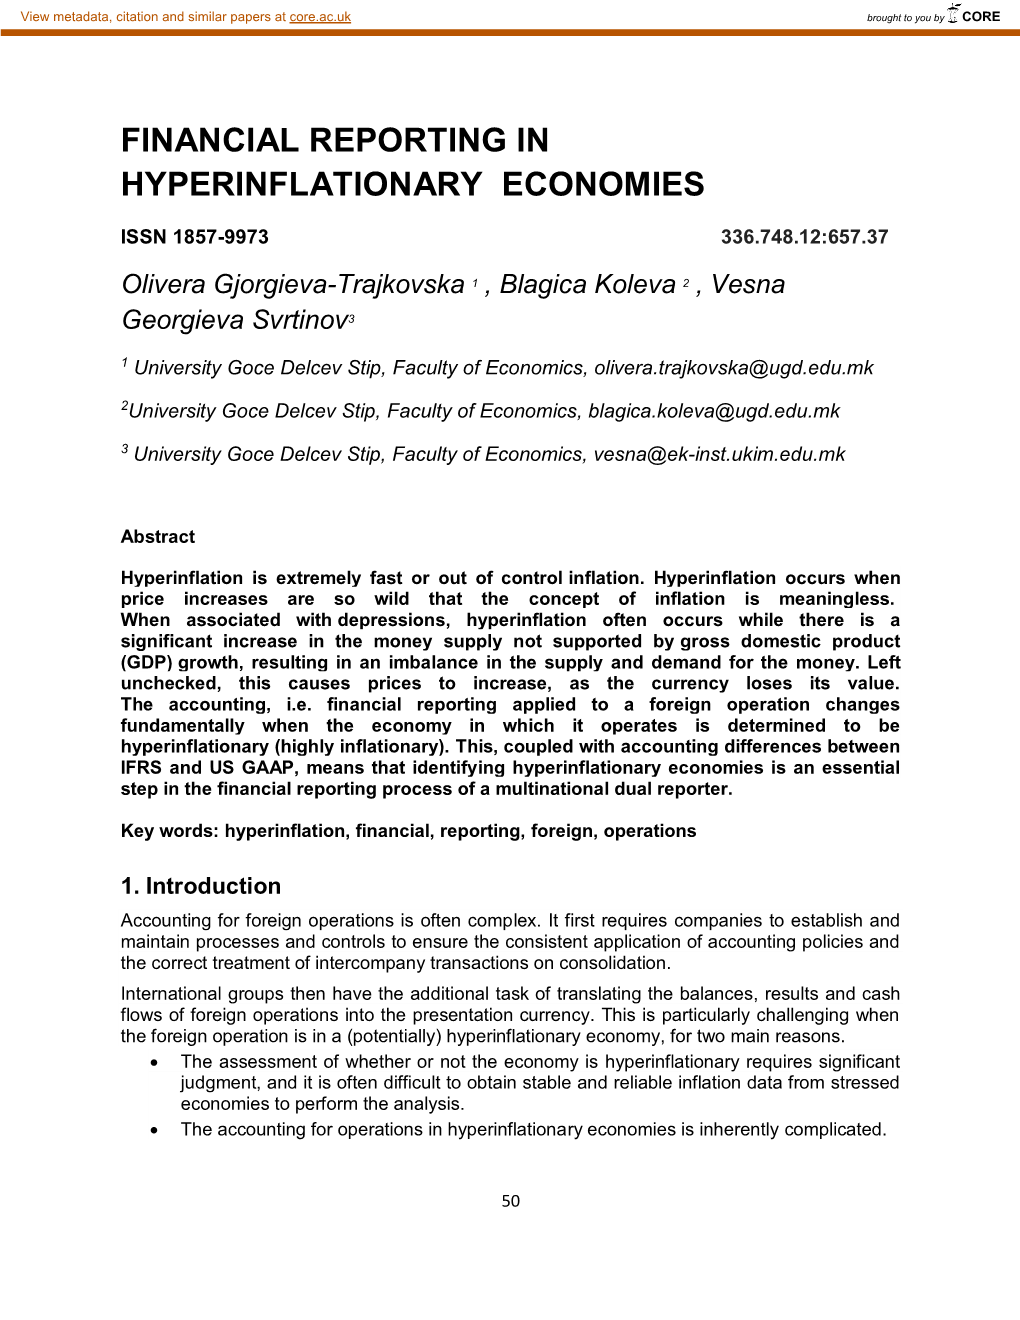 Financial Reporting in Hyperinflationary Economies